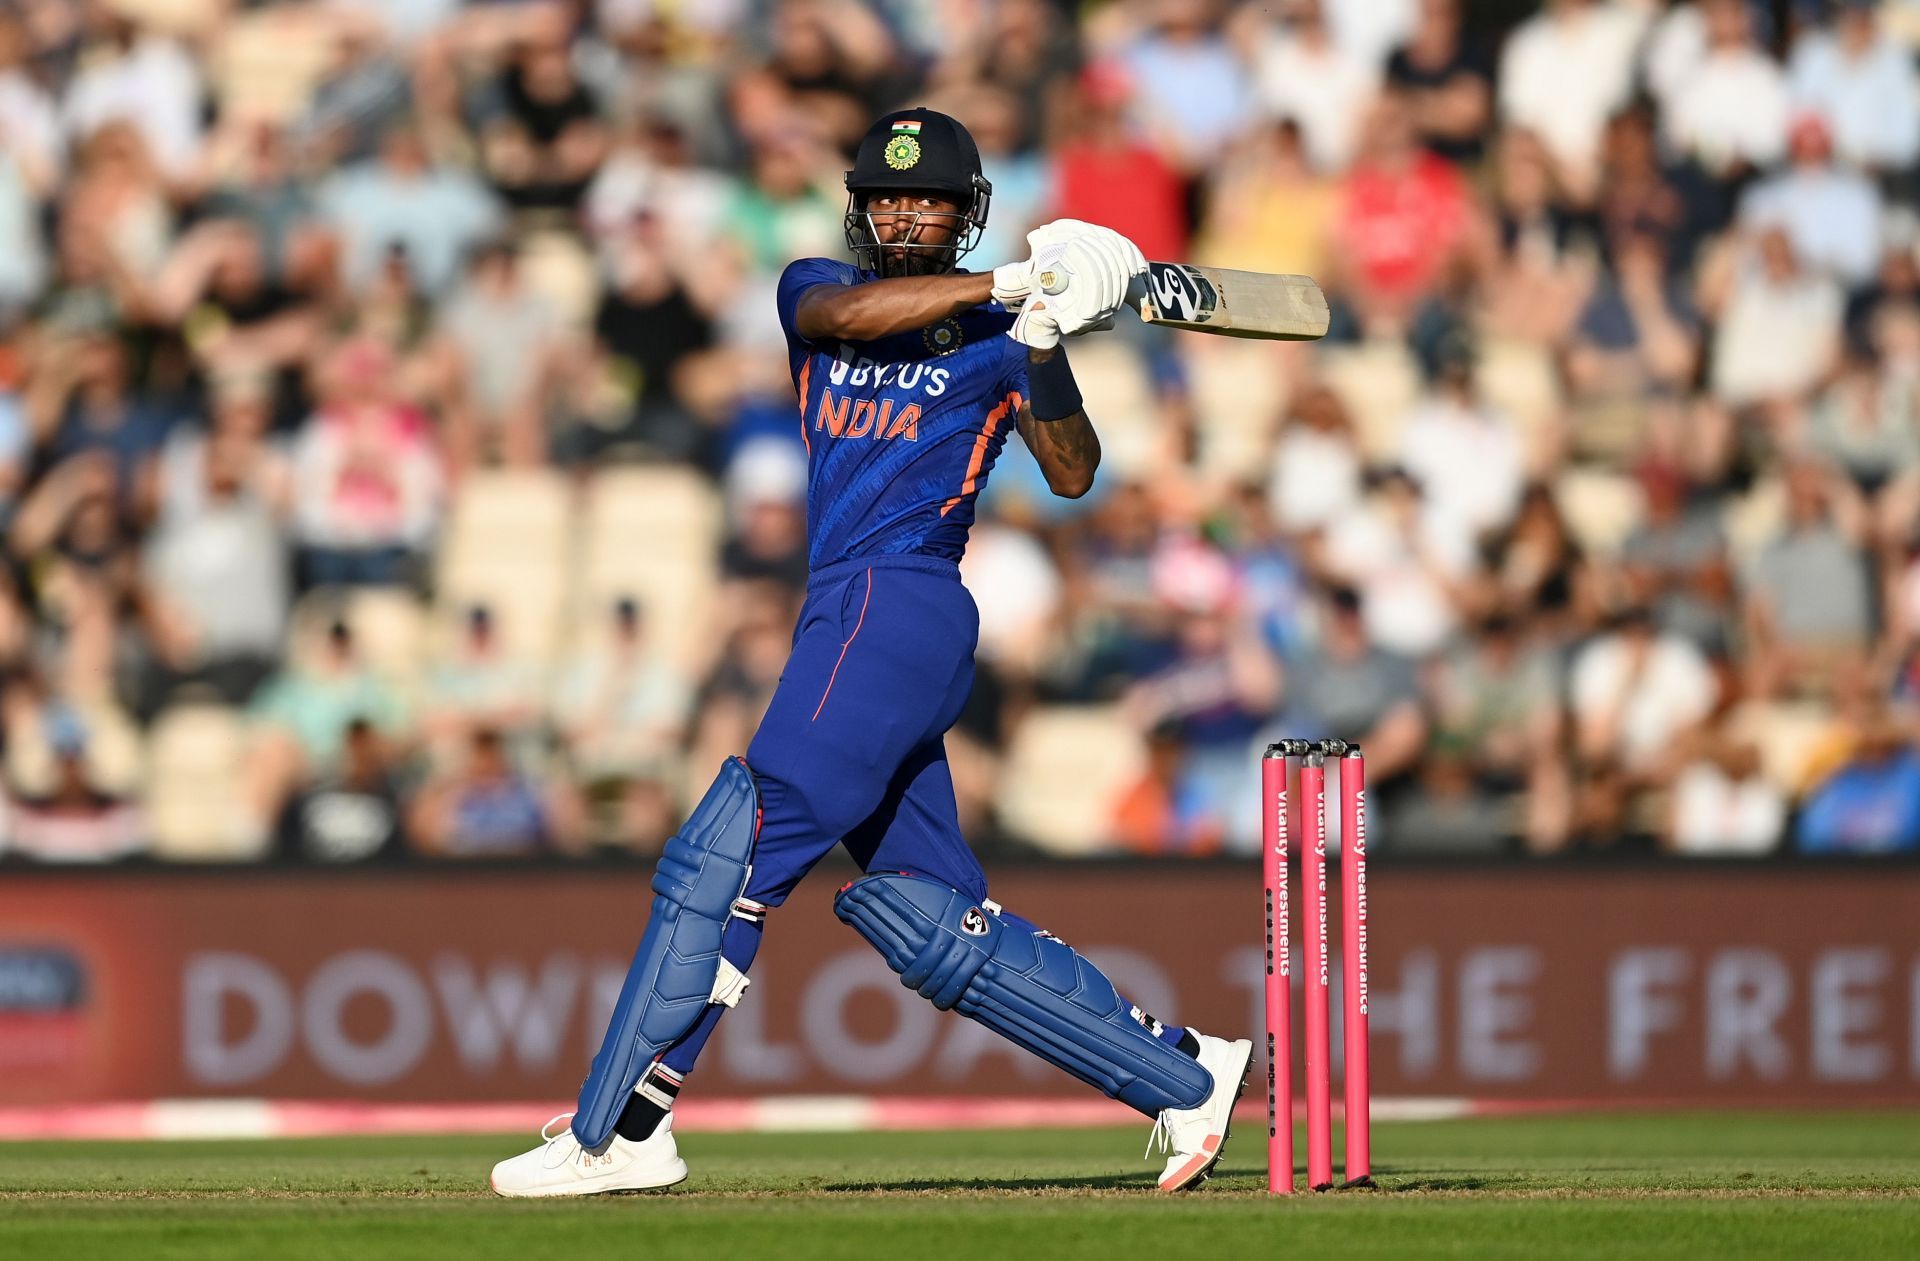 Aakash Chopra is expecting substantial contributions from Rohit Sharma and Hardik Pandya in the second T20I against England